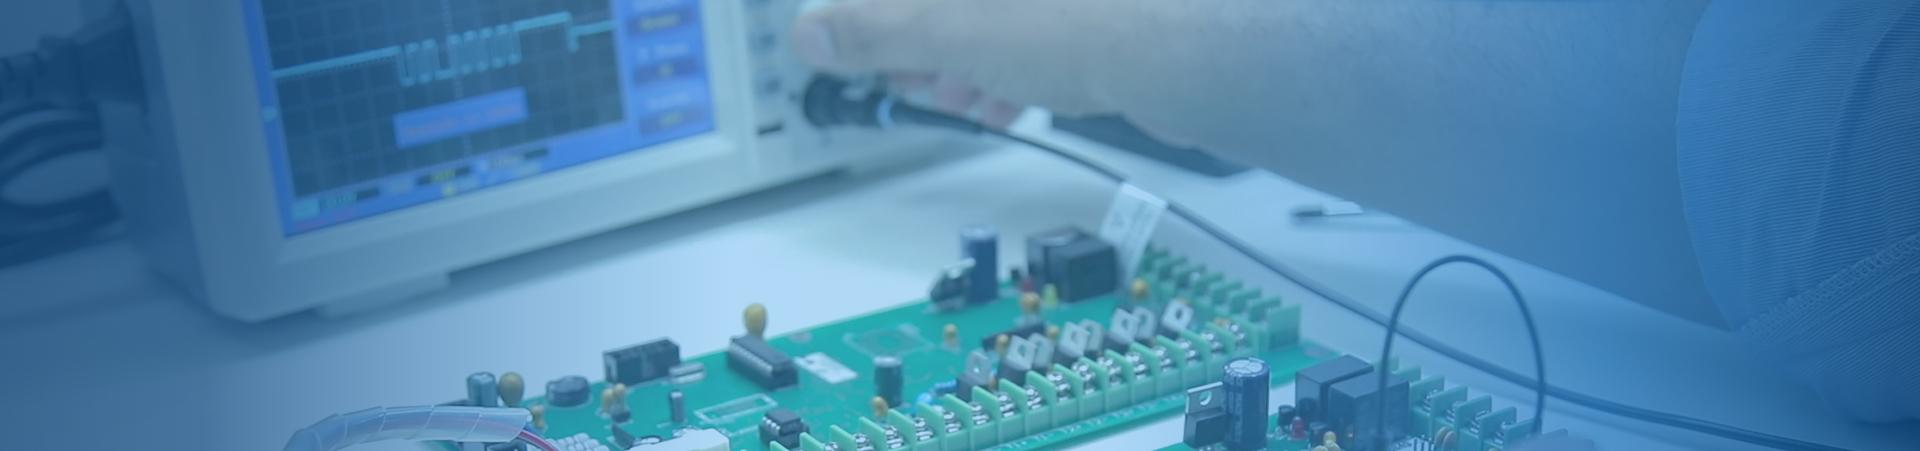 PCB Testing and Inspection Services.jpg